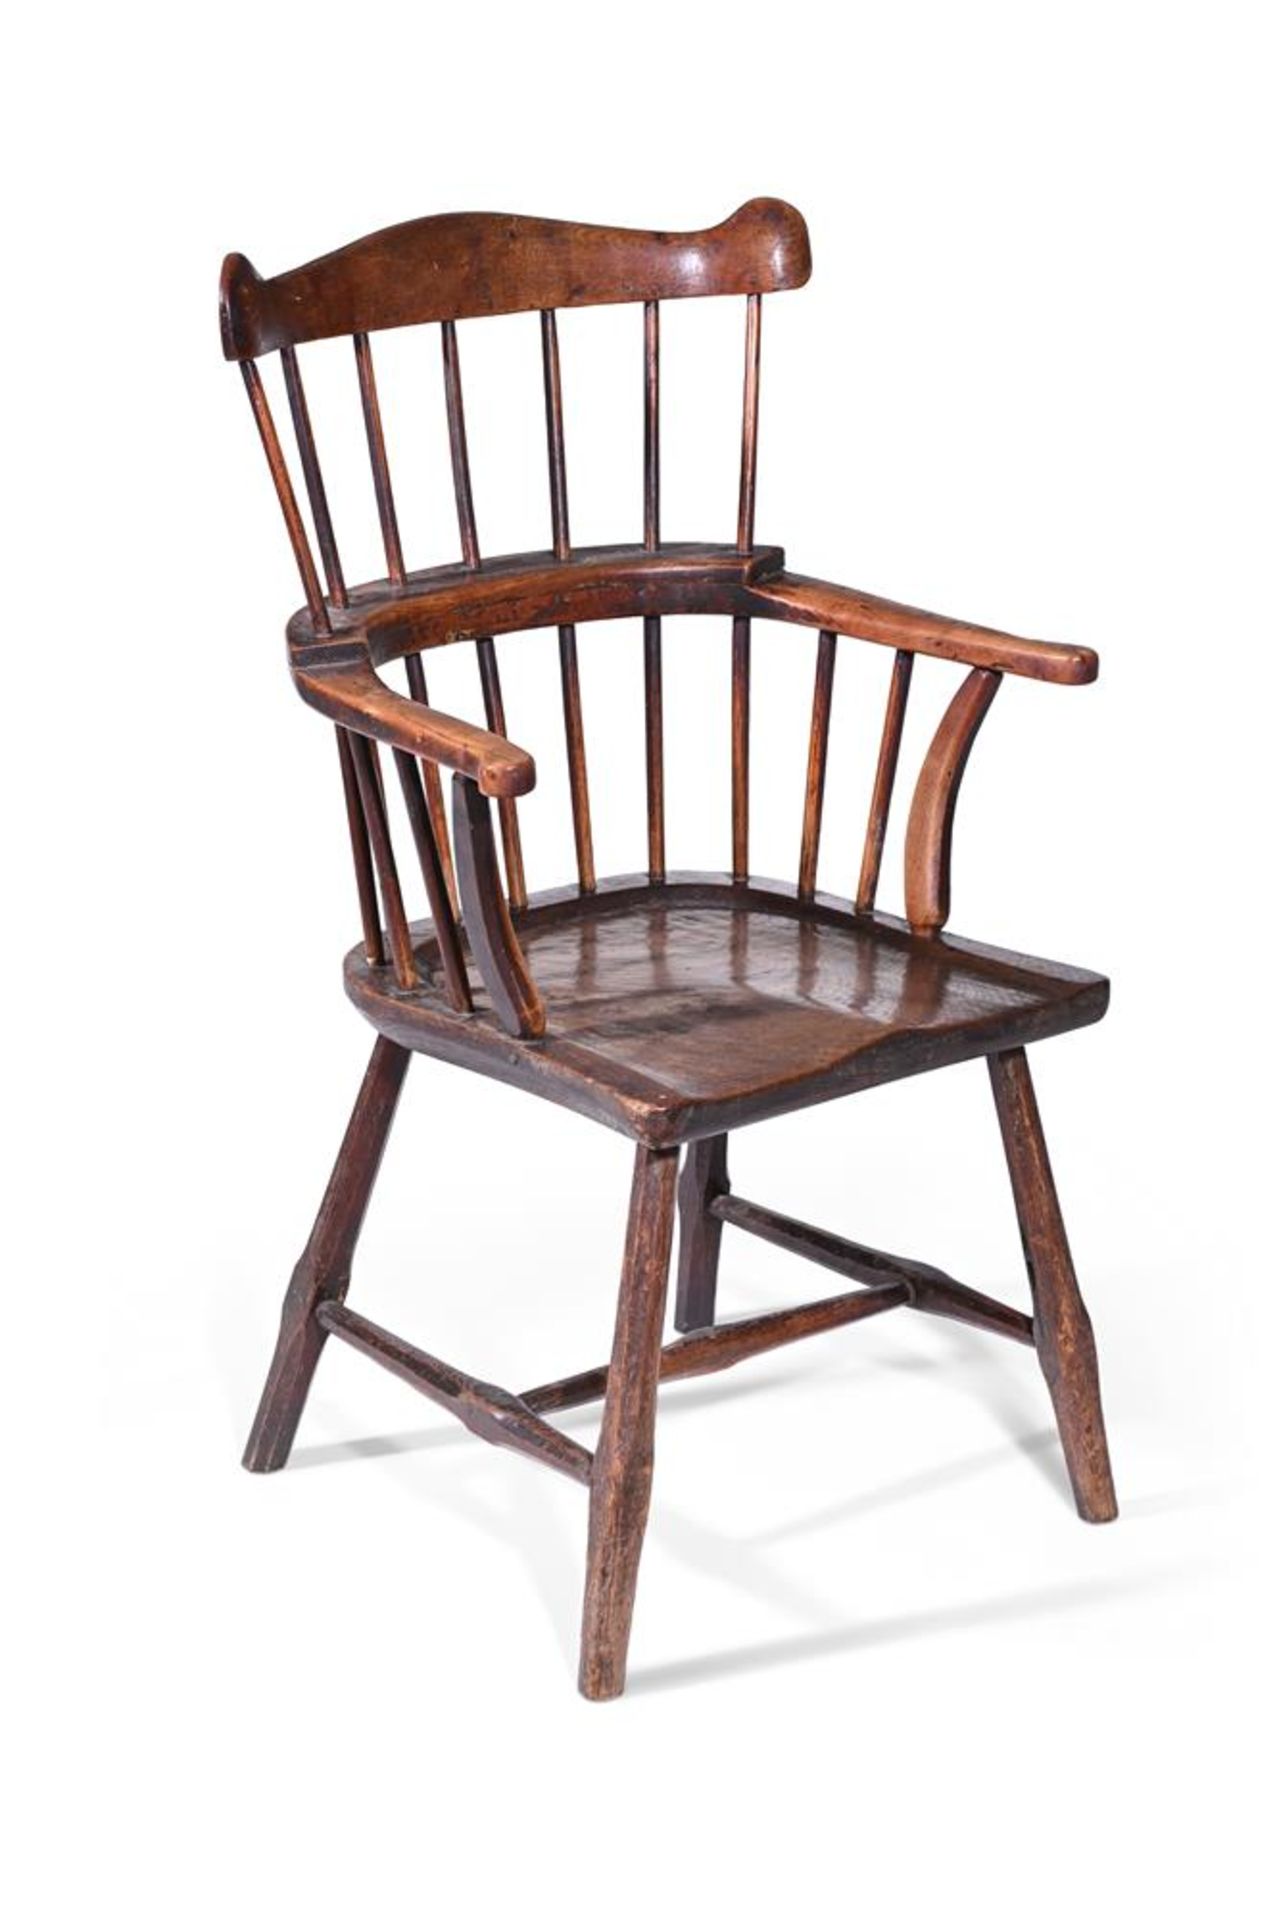 AN ELM AND ASH STICK BACK ARMCHAIR, PROBABLY WELSH, 18TH CENTURY